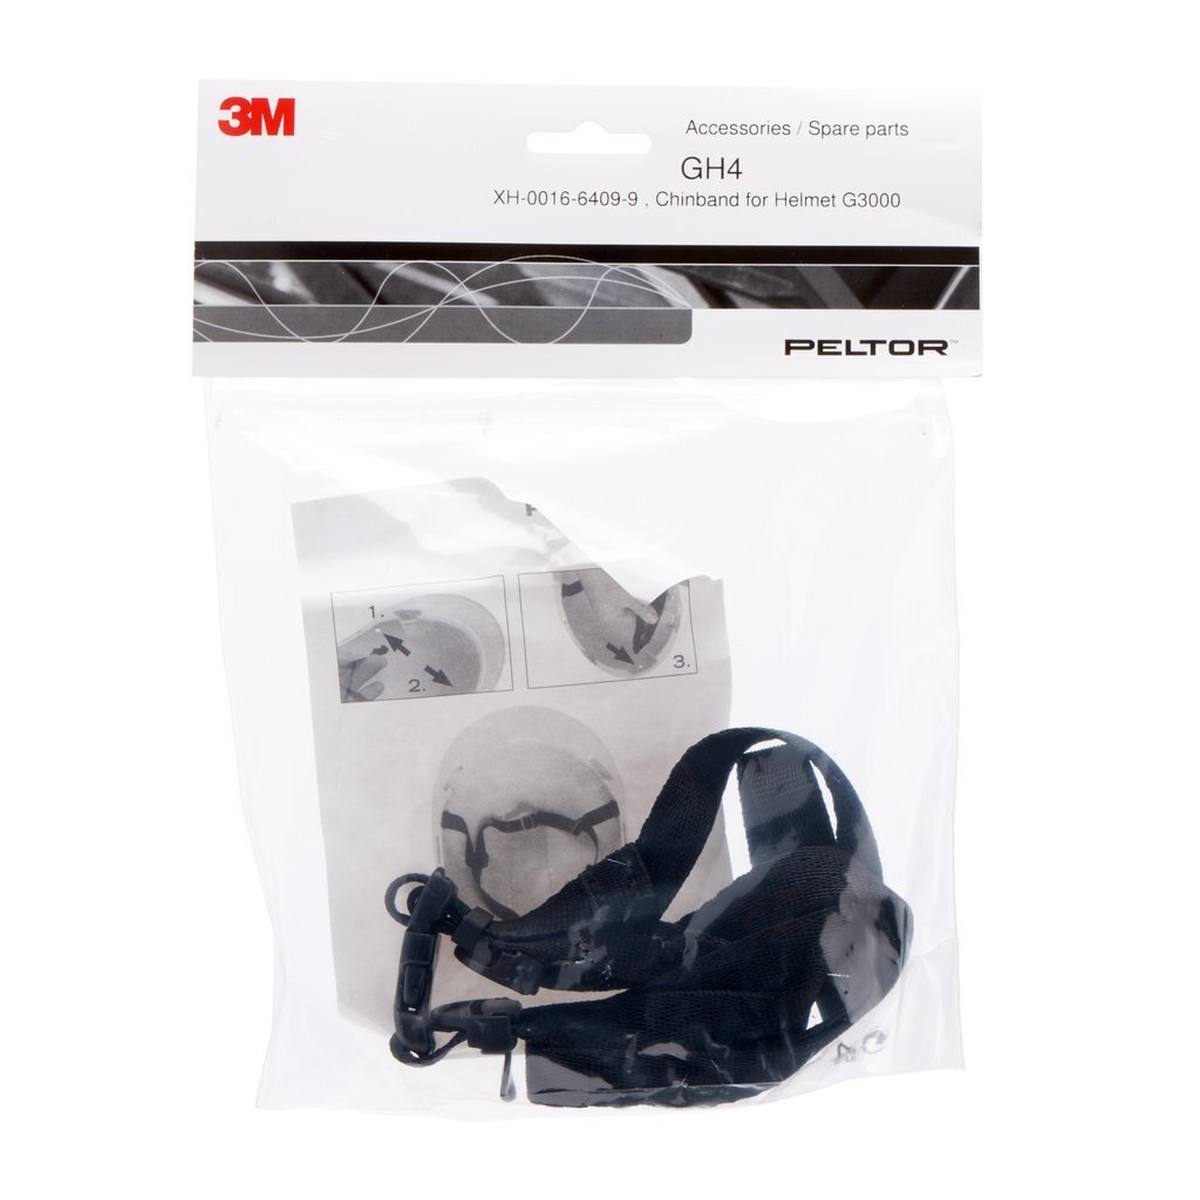 3M Chin strap GH4 3-point attachment for safety helmet H700/G3000